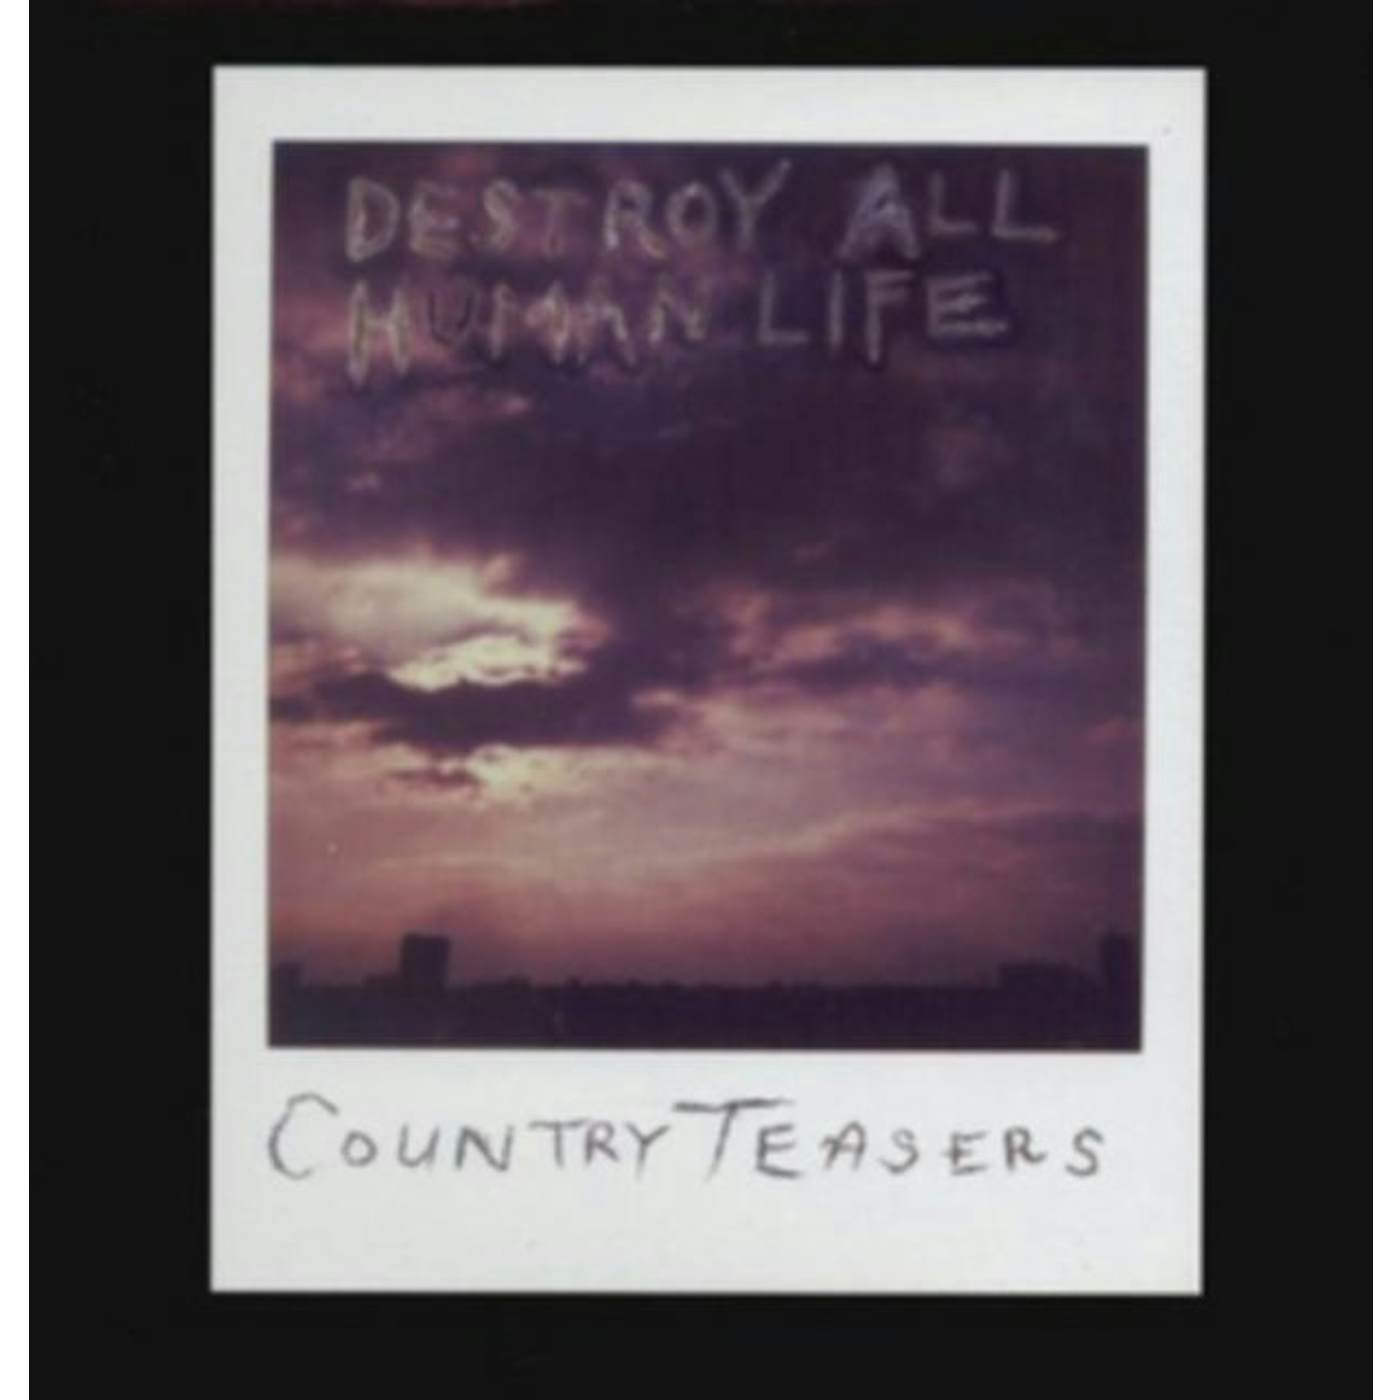 Country Teasers LP - Destroy All Human Life (Vinyl)